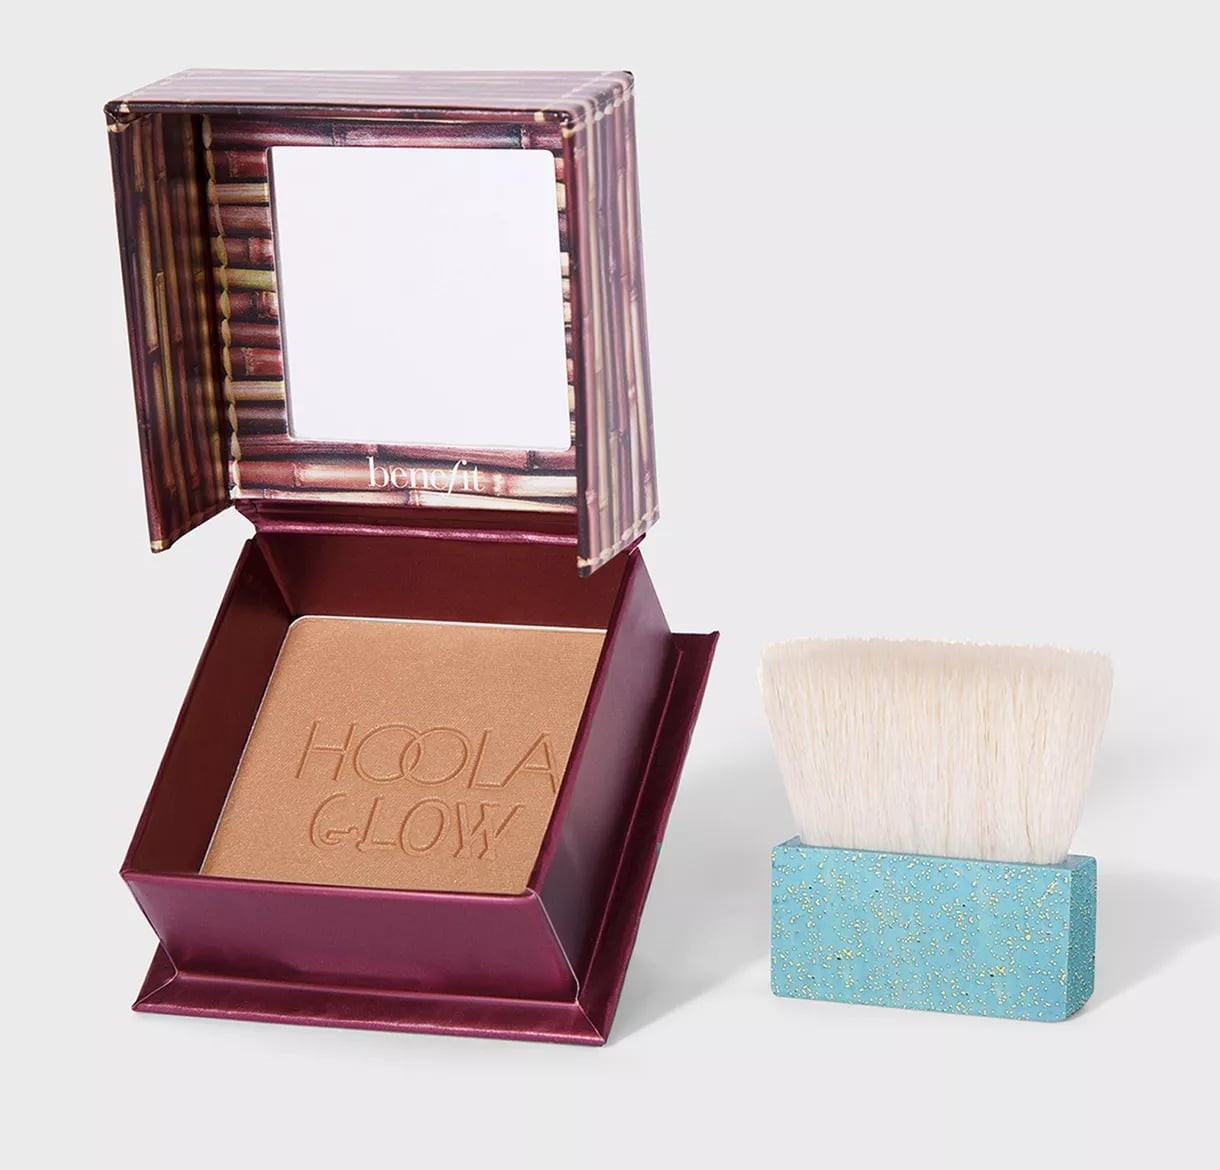 Hoola Glow Shimmer Bronzer by Benefit Cosmetics